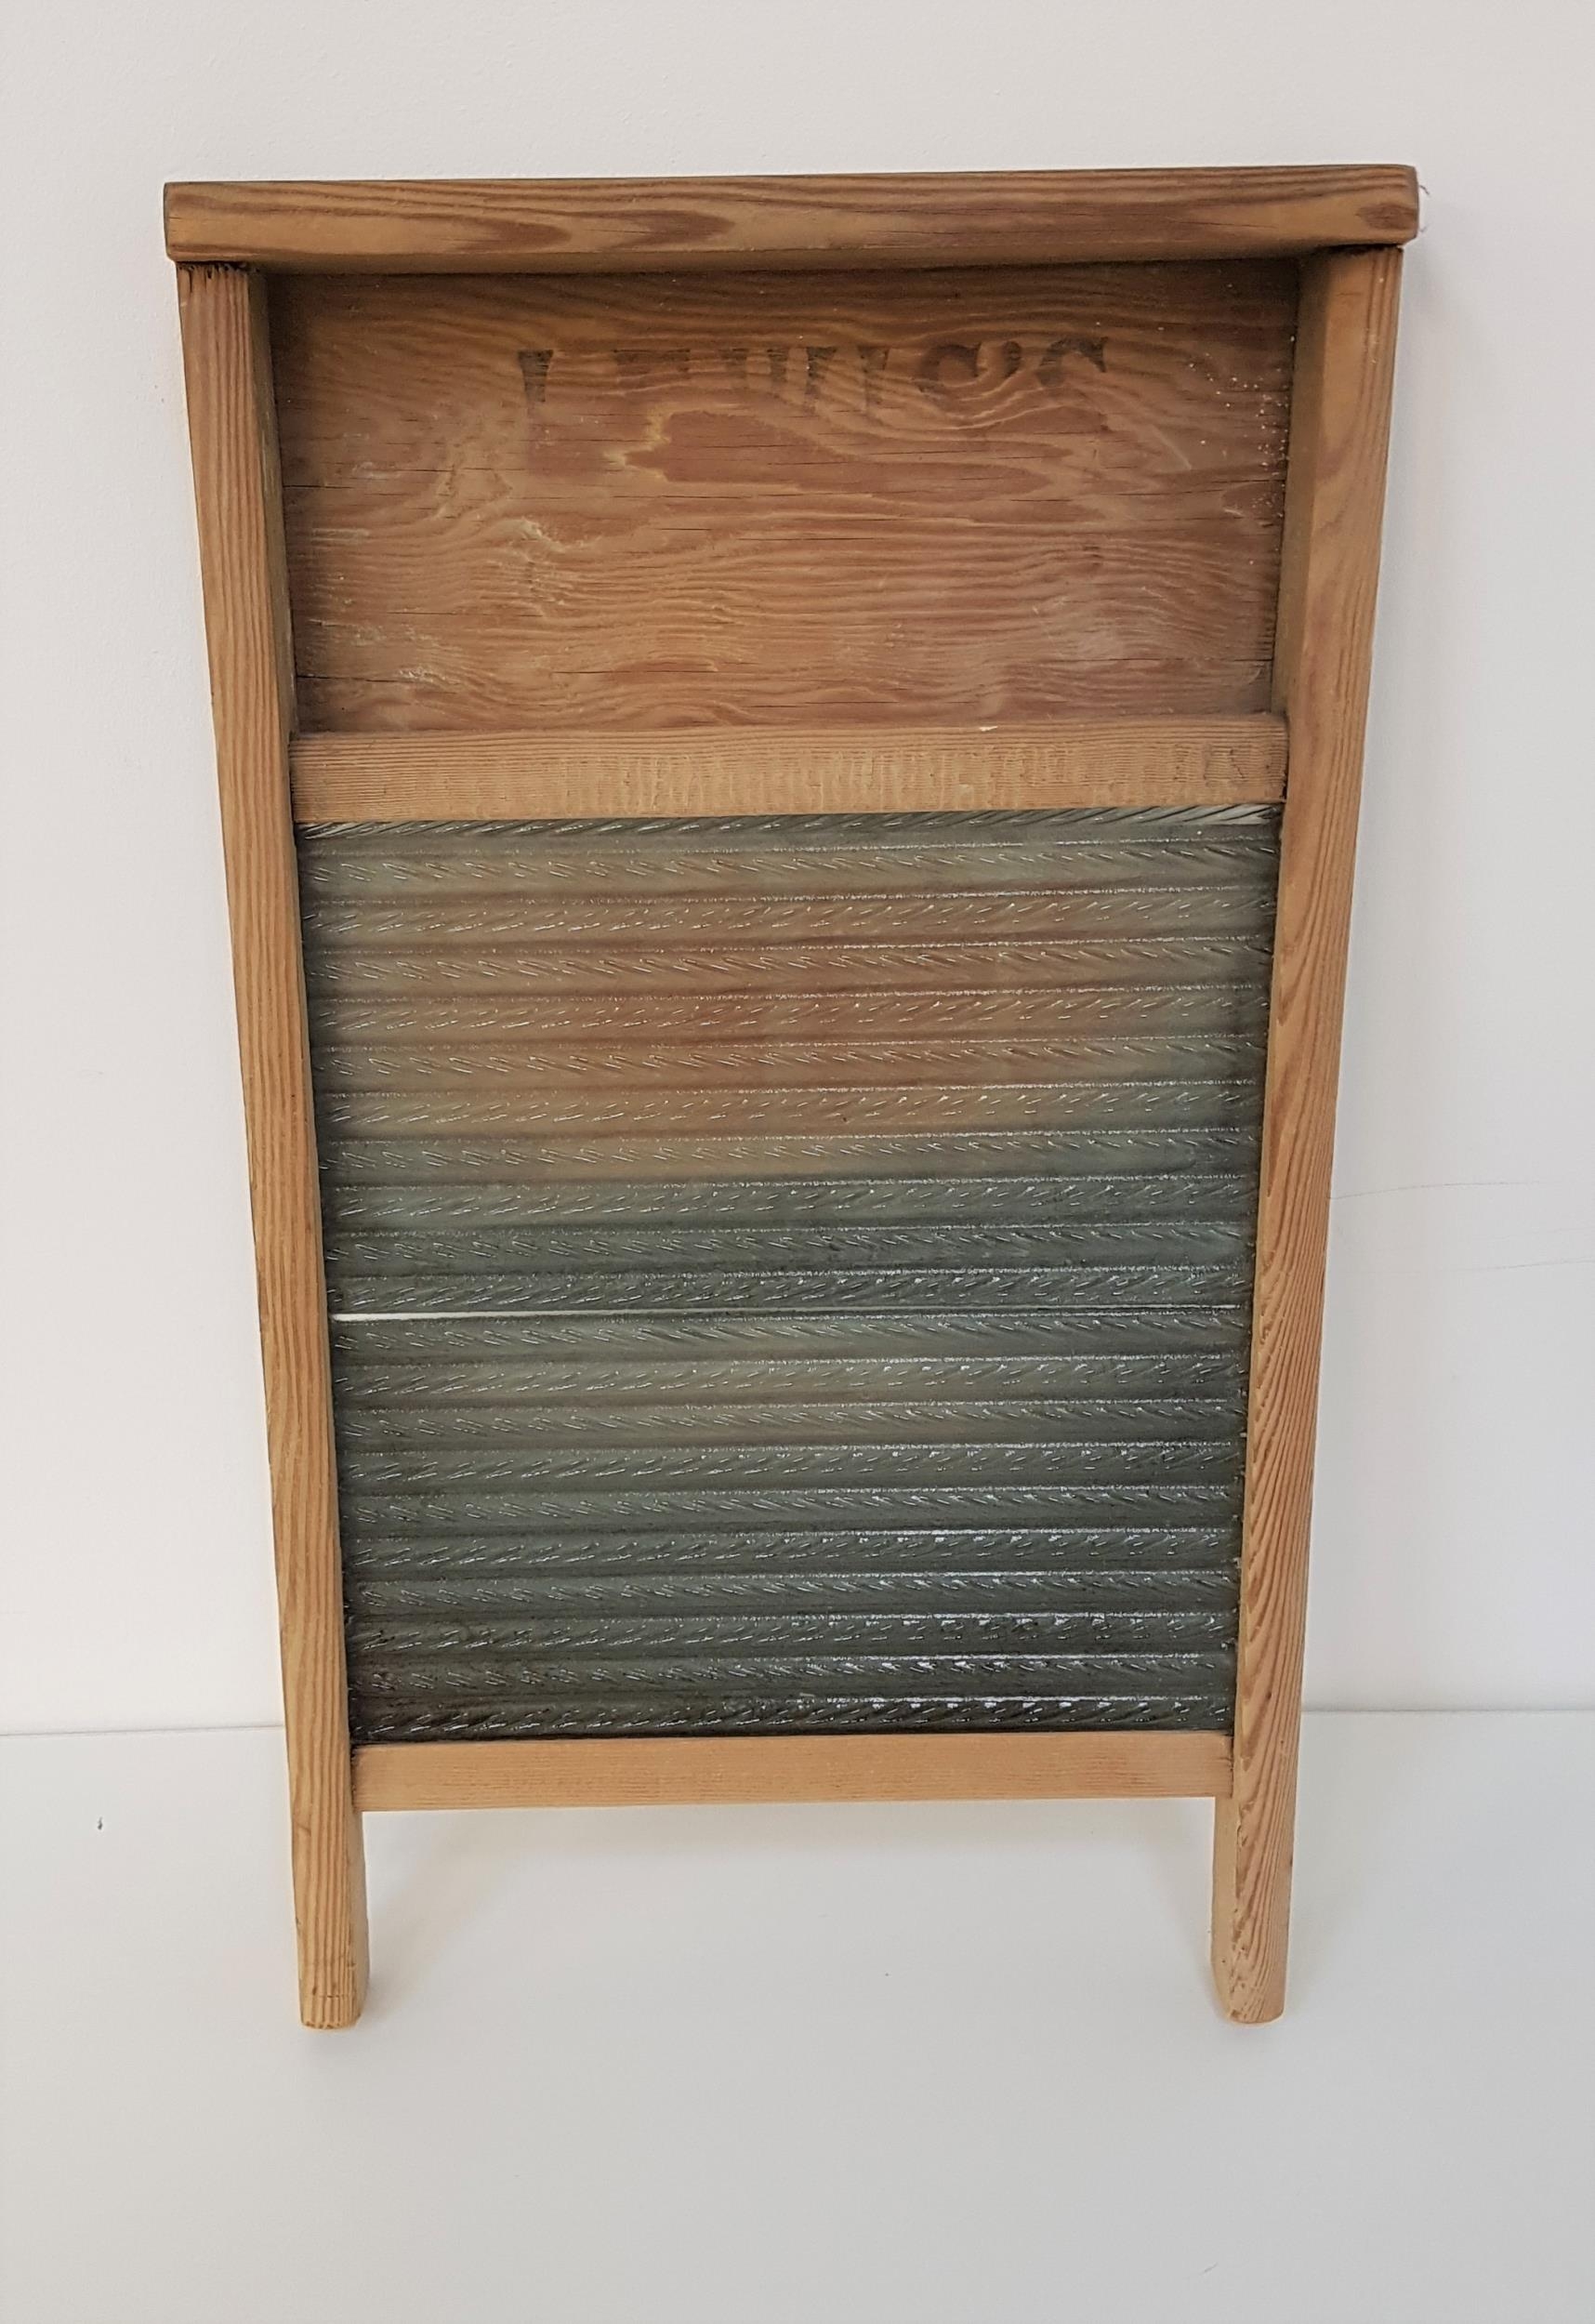 VINTAGE PINE FRAME WASHBOARD with a serrated glass panel, marked Lewis's, 54.5cm high